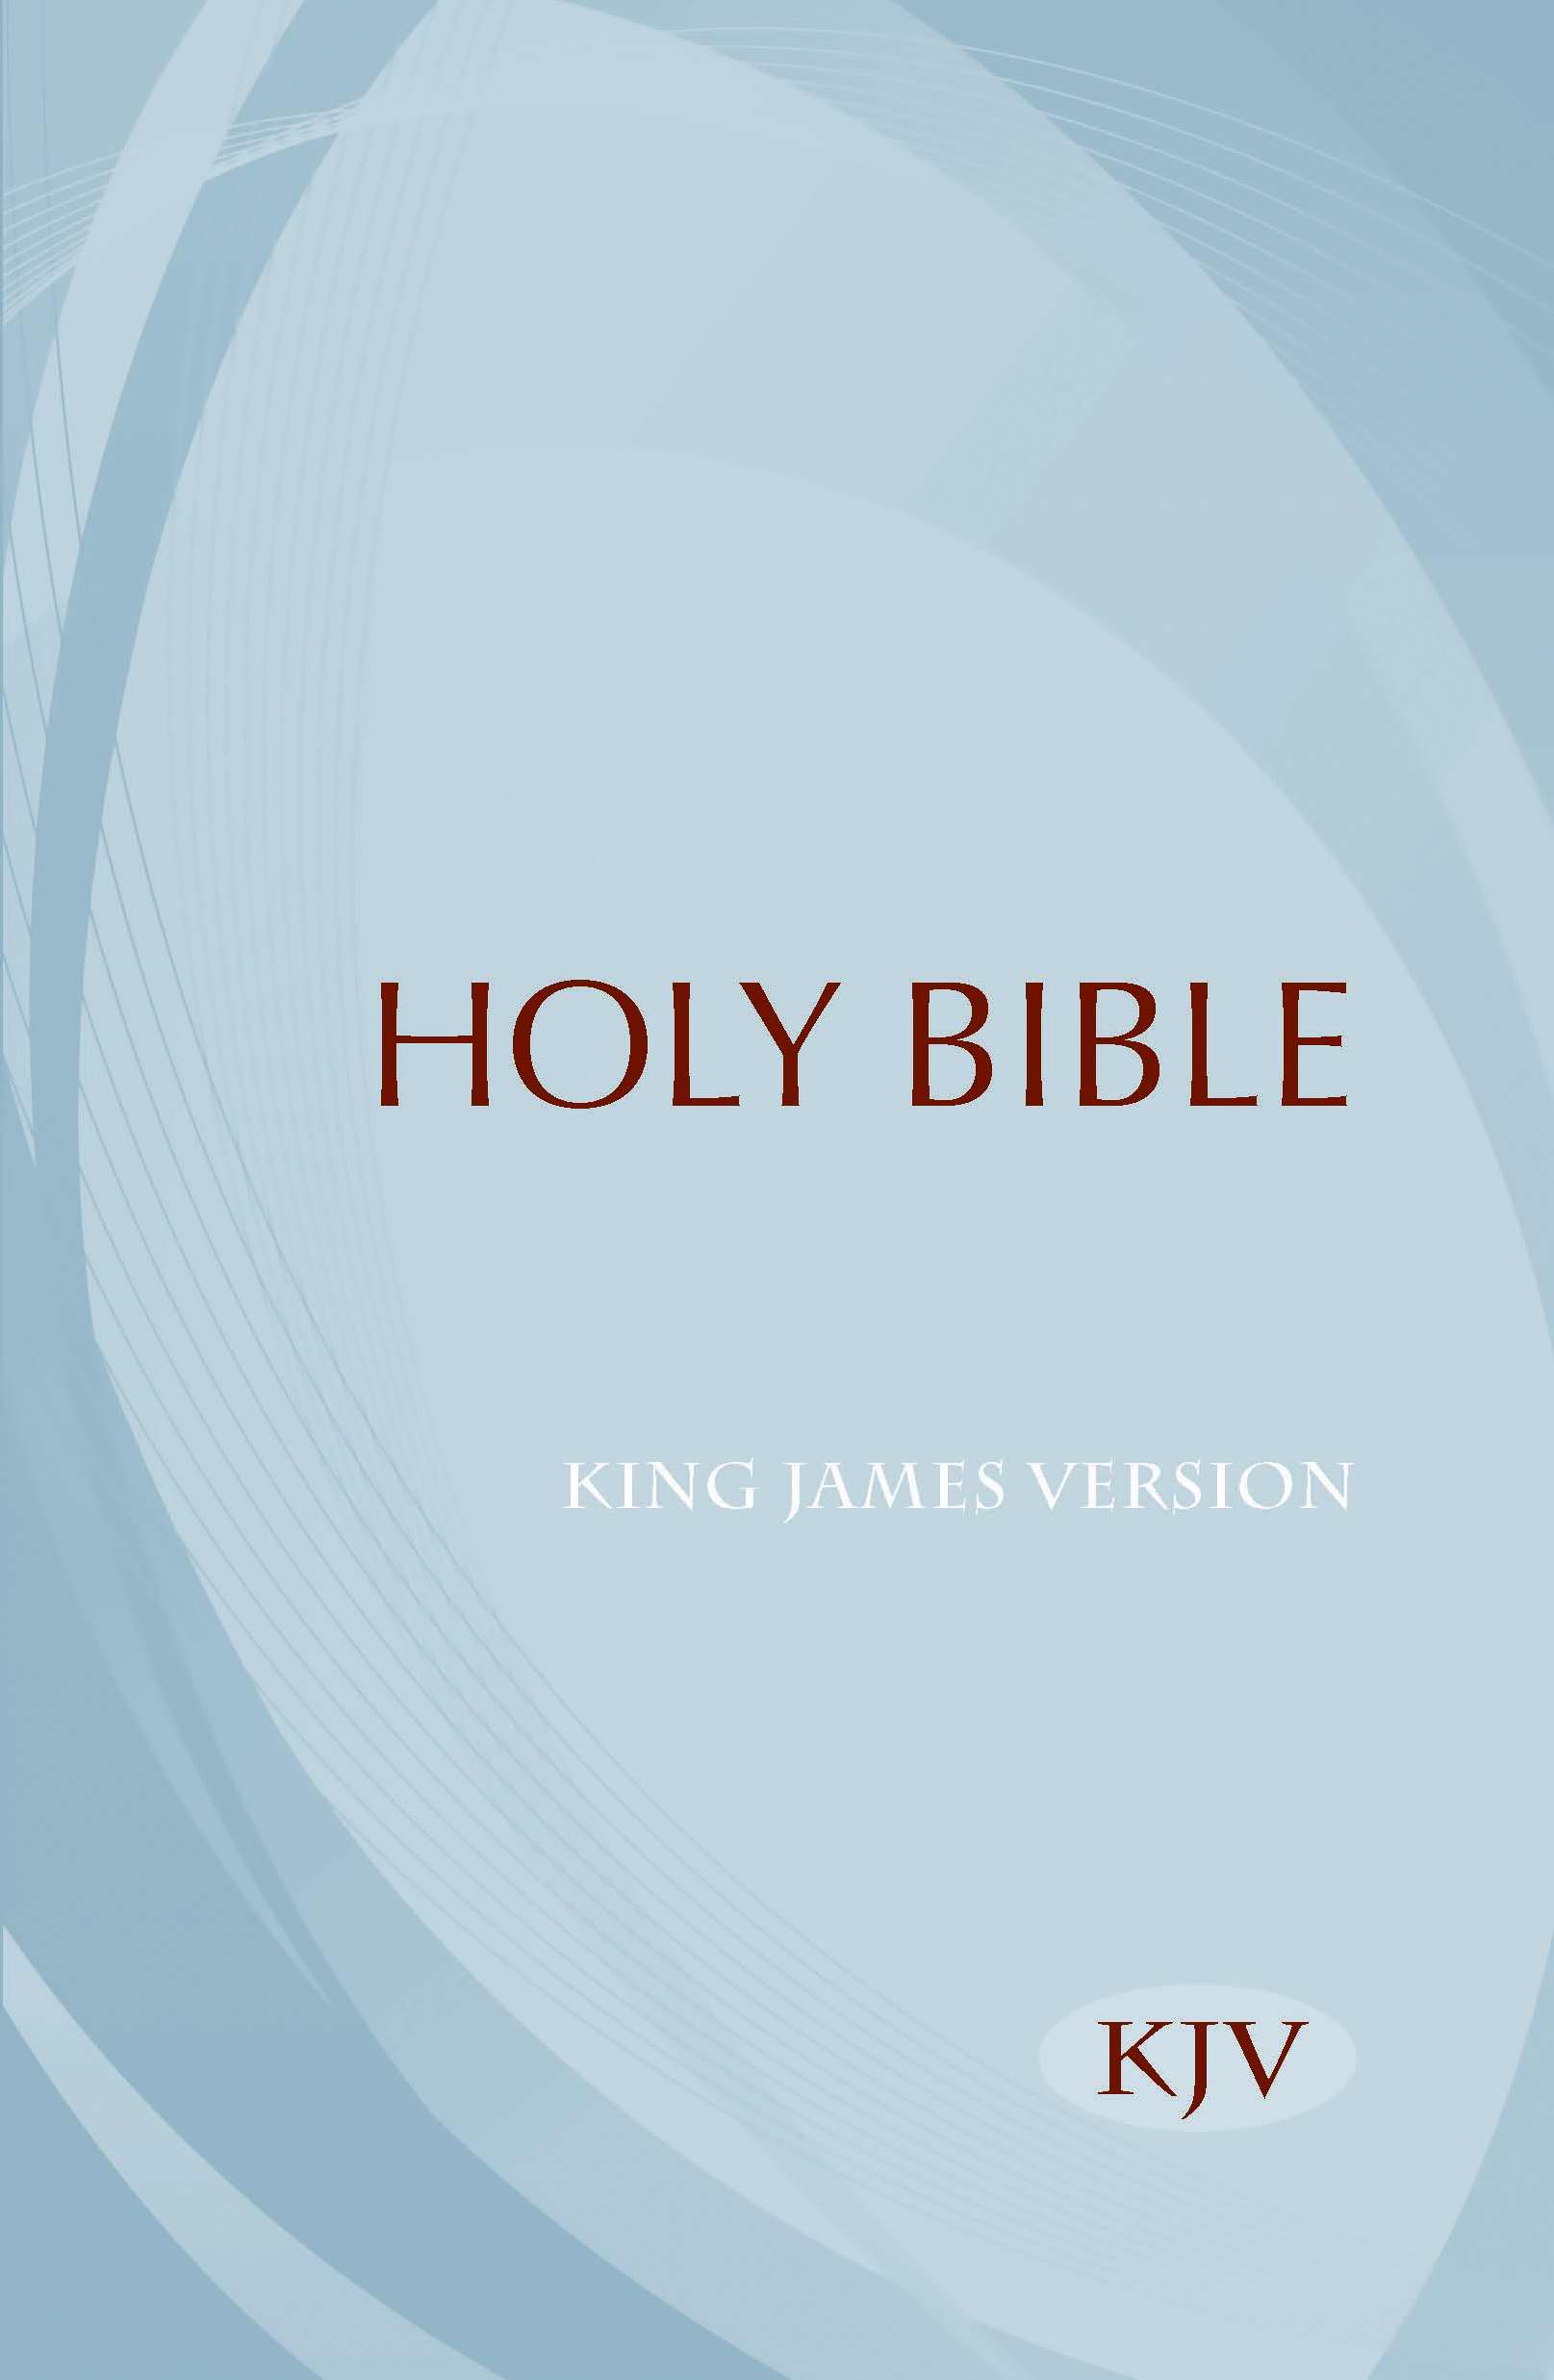 Image of KJV Outreach Bible other